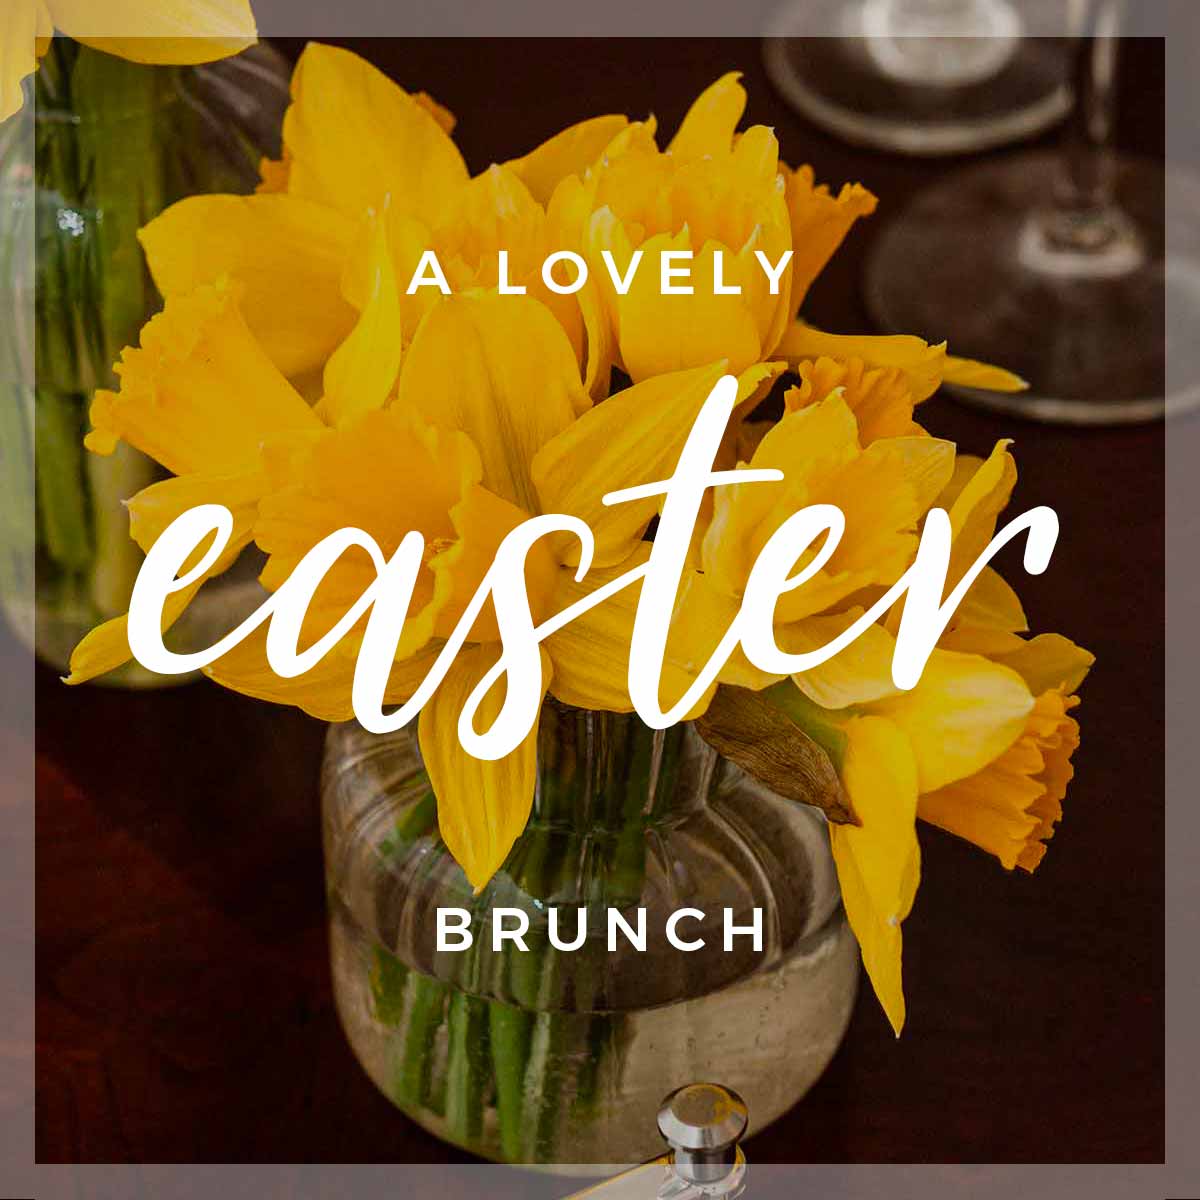 A flower arrangement in a glass jar with a title that says "A lovely easter brunch."